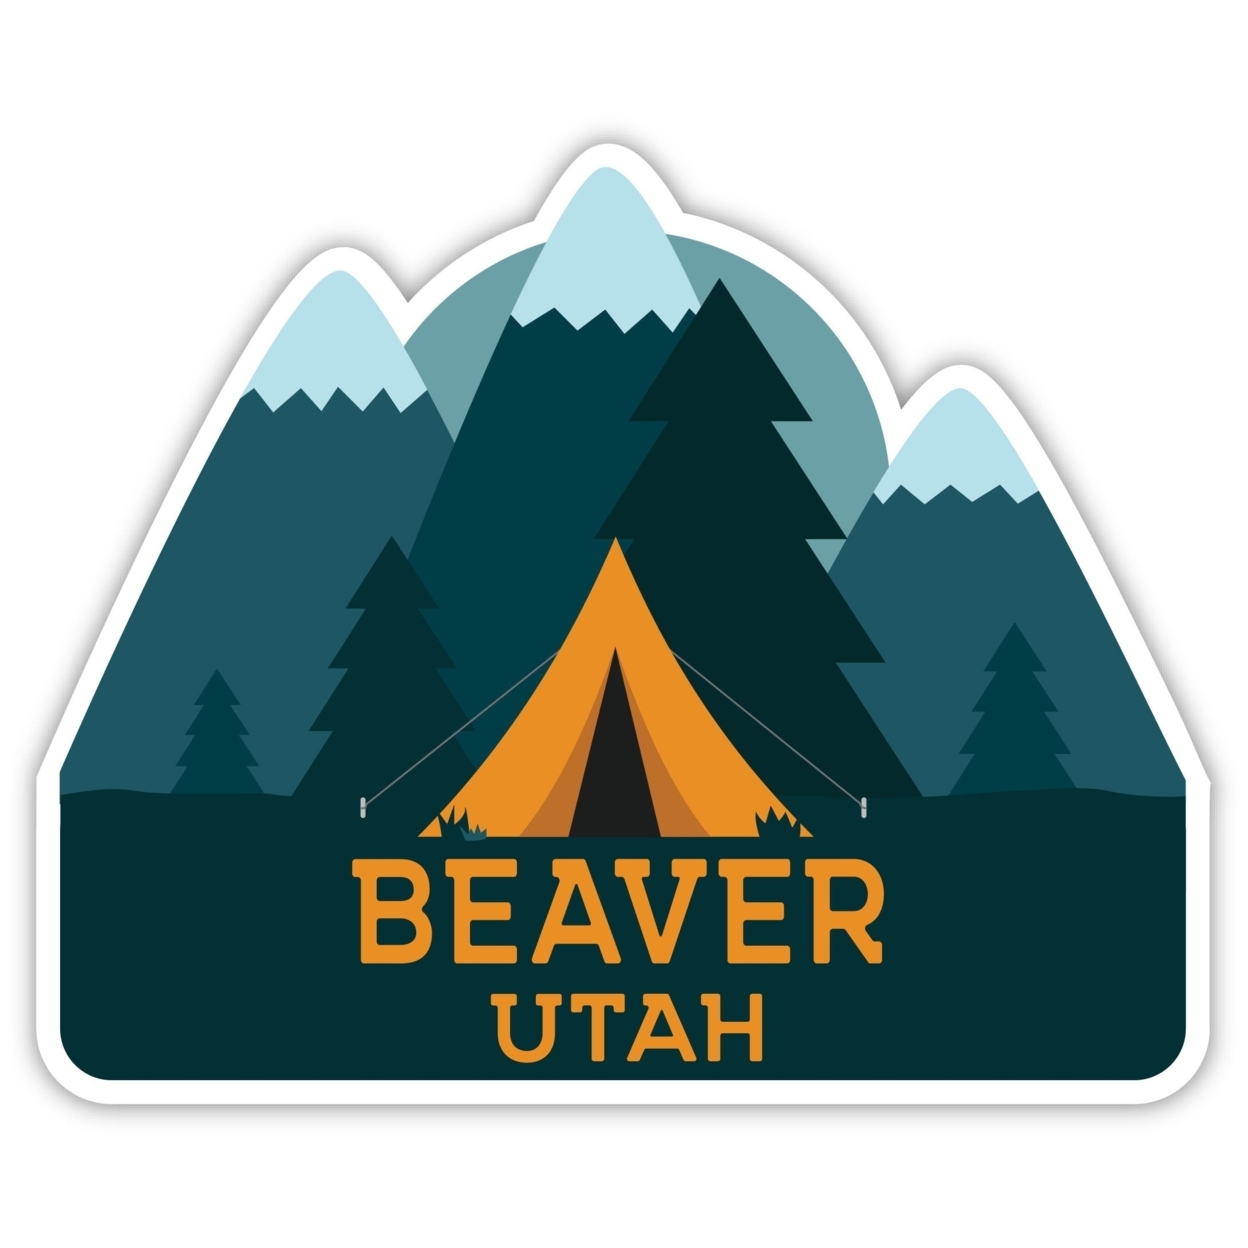 Beaver Utah Souvenir Decorative Stickers (Choose Theme And Size) - 4-Pack, 12-Inch, Tent